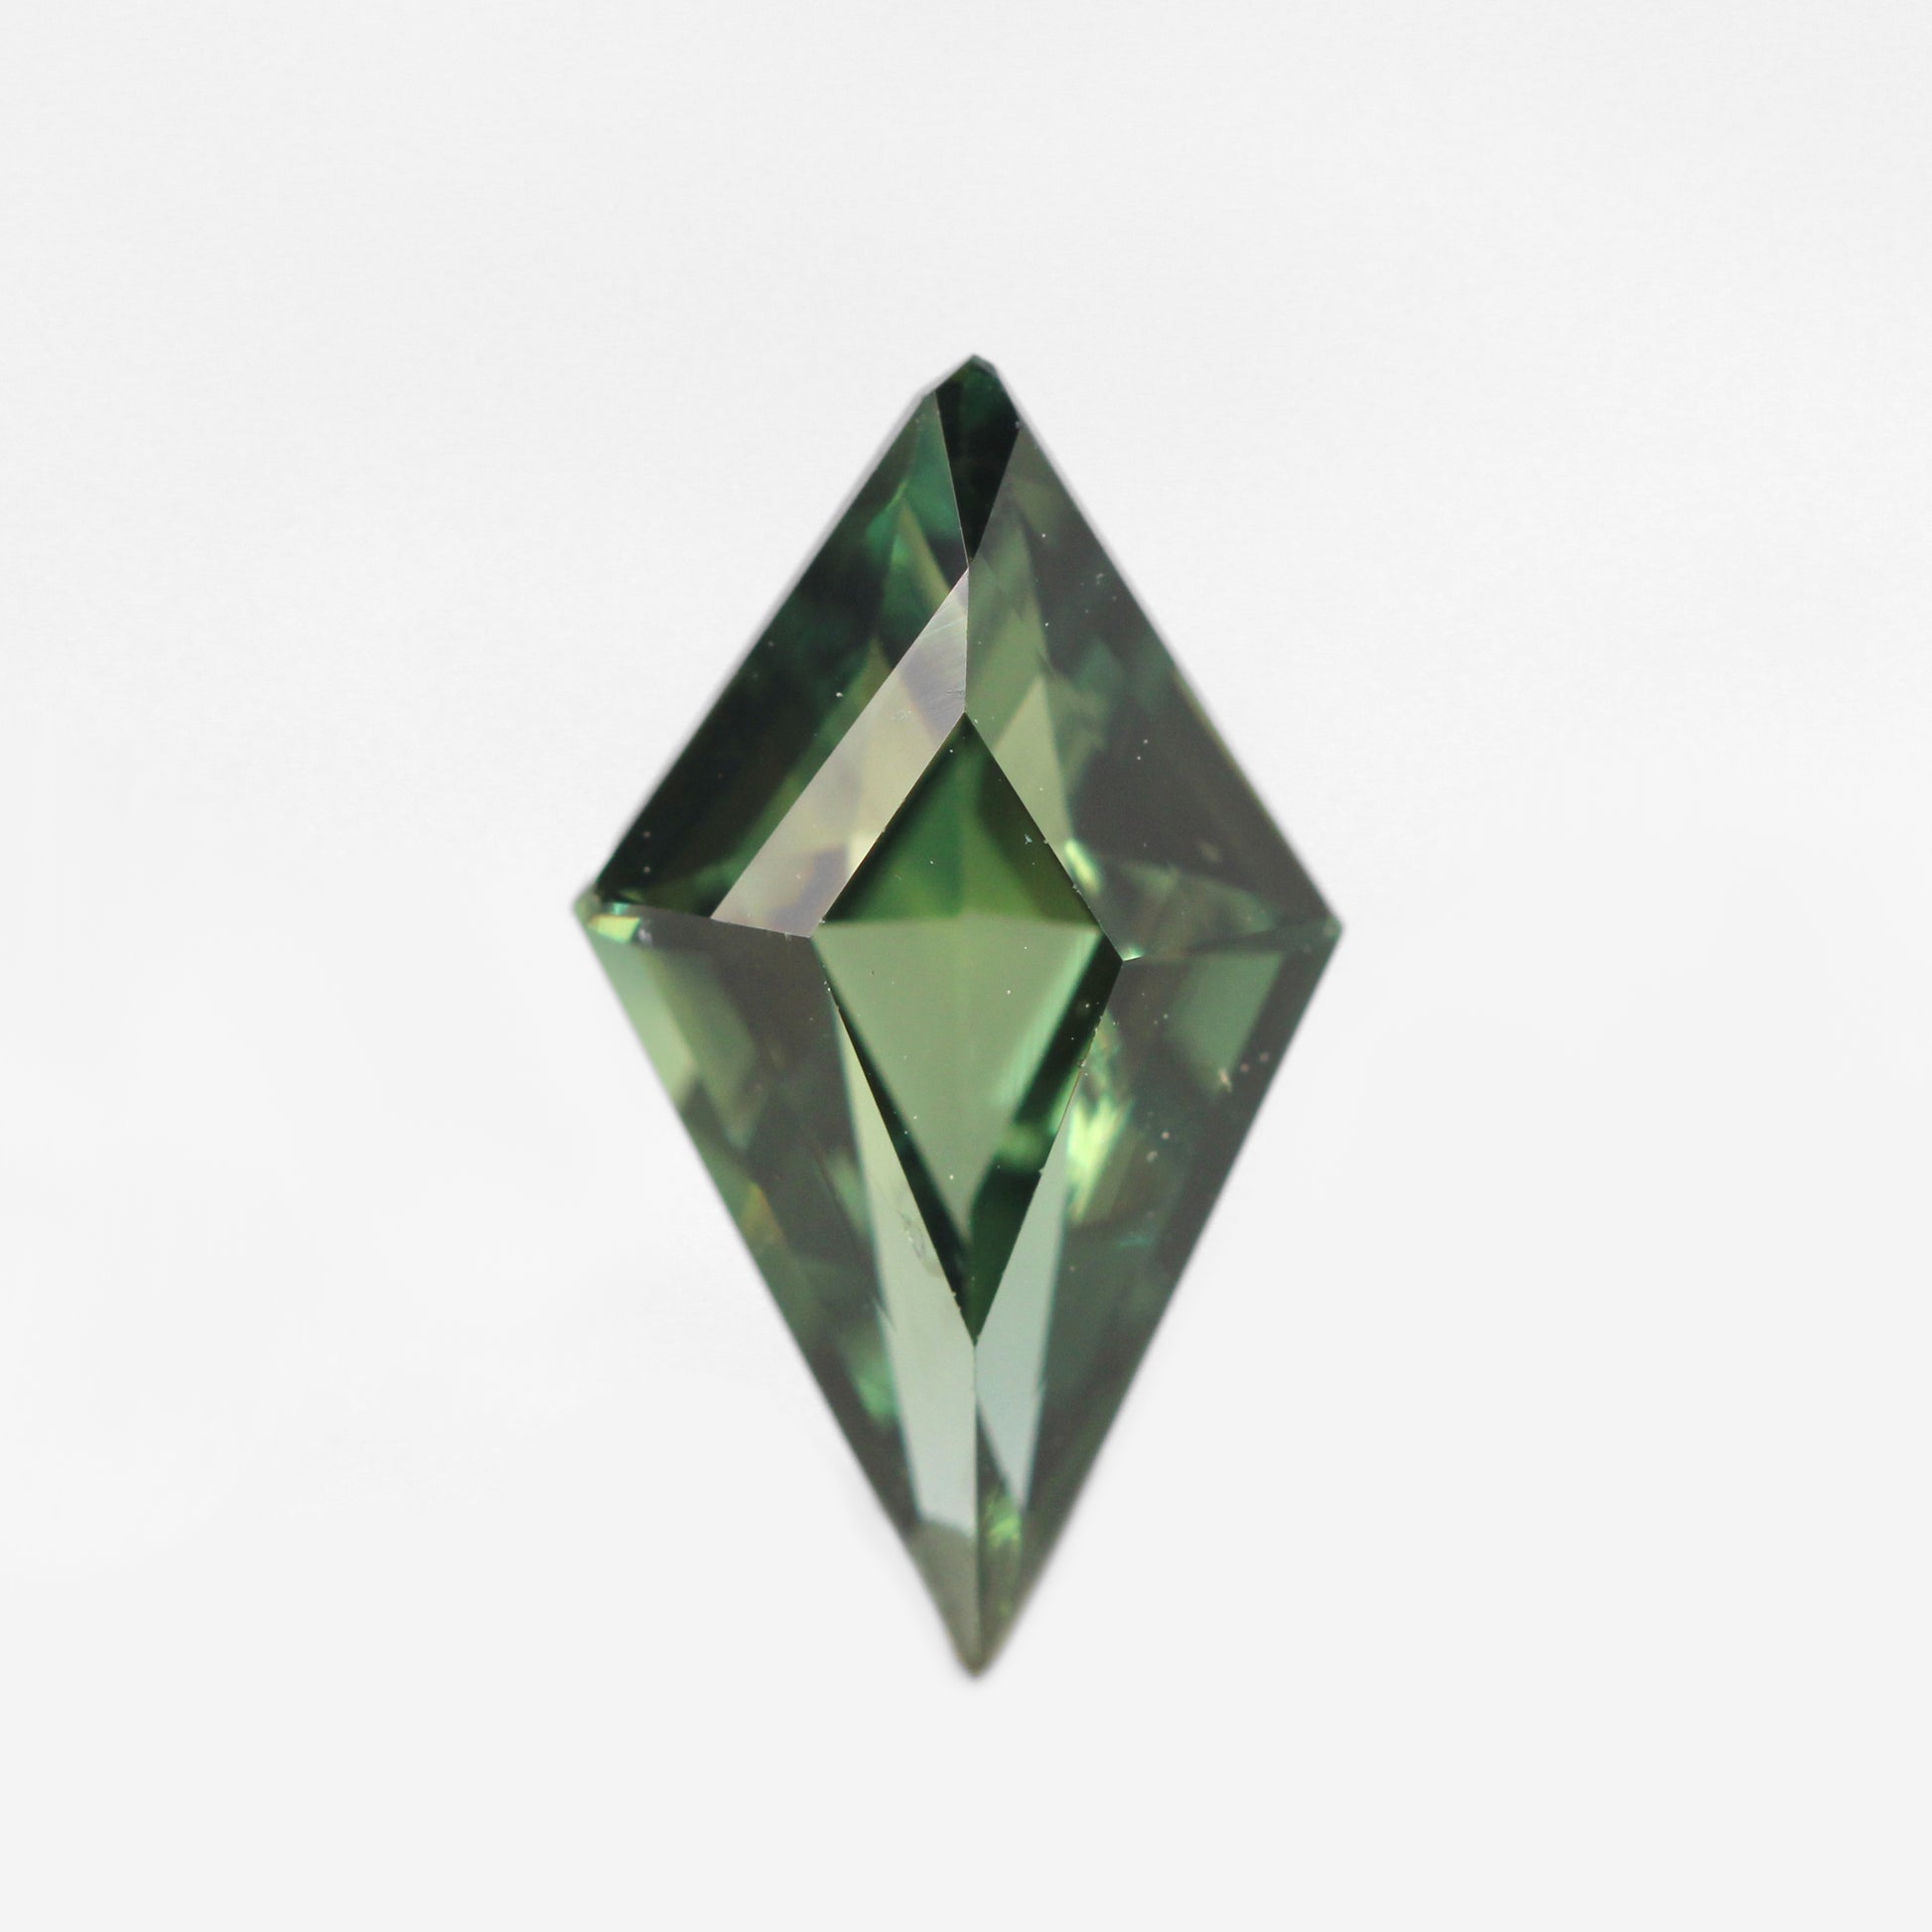 1.40 Carat Green Kite Sapphire for Custom Work - Inventory Code GKSAP140 - Midwinter Co. Alternative Bridal Rings and Modern Fine Jewelry